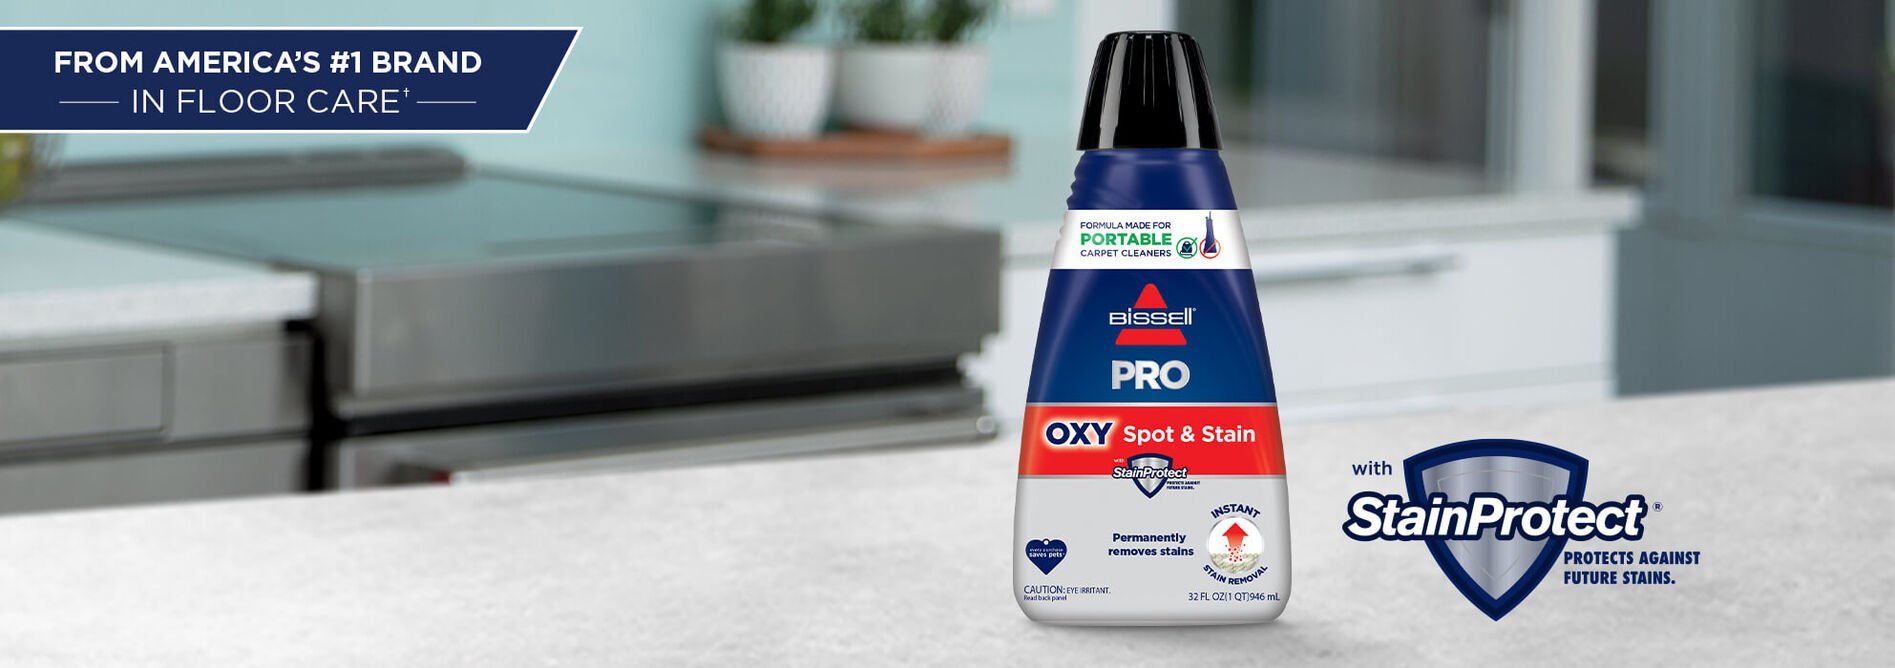 BISSELL Advanced Pro Oxy Spot & Stain Formula for Portable Spot Cleaners,  32 oz., 2038W